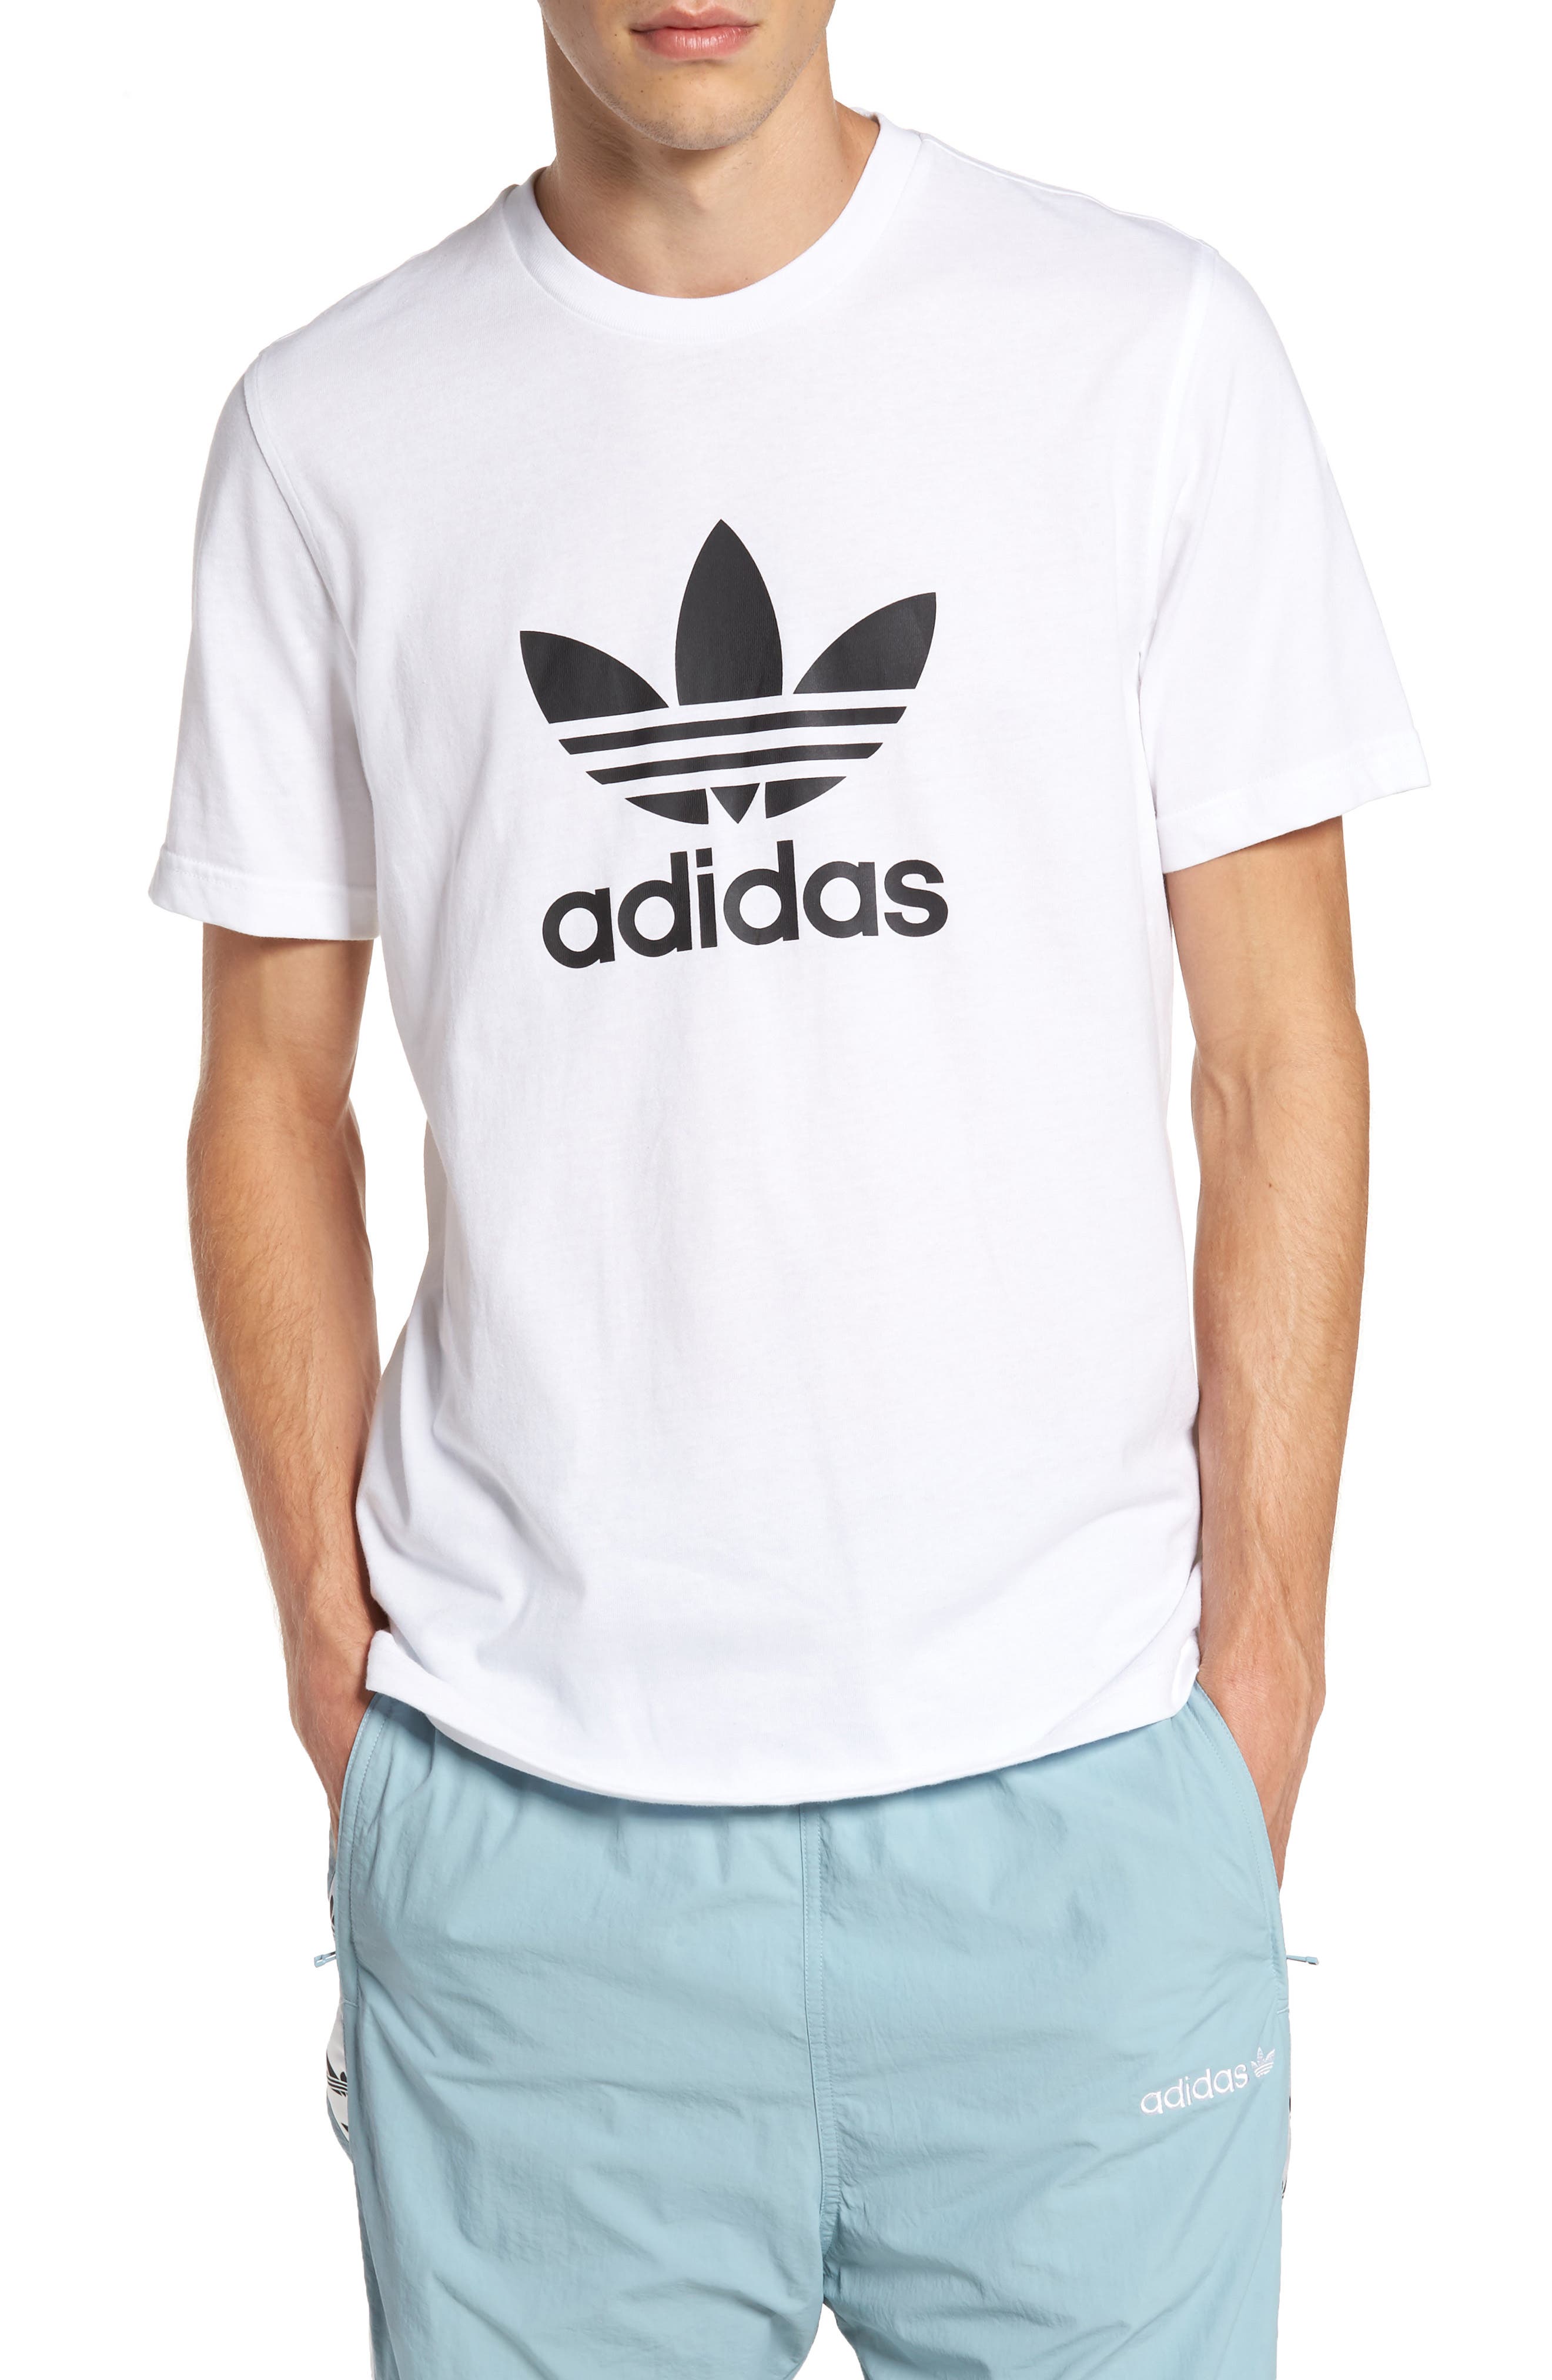 UPC 191034257703 product image for adidas Originals Trefoil Graphic T-Shirt in White at Nordstrom, Size X-Large Us | upcitemdb.com